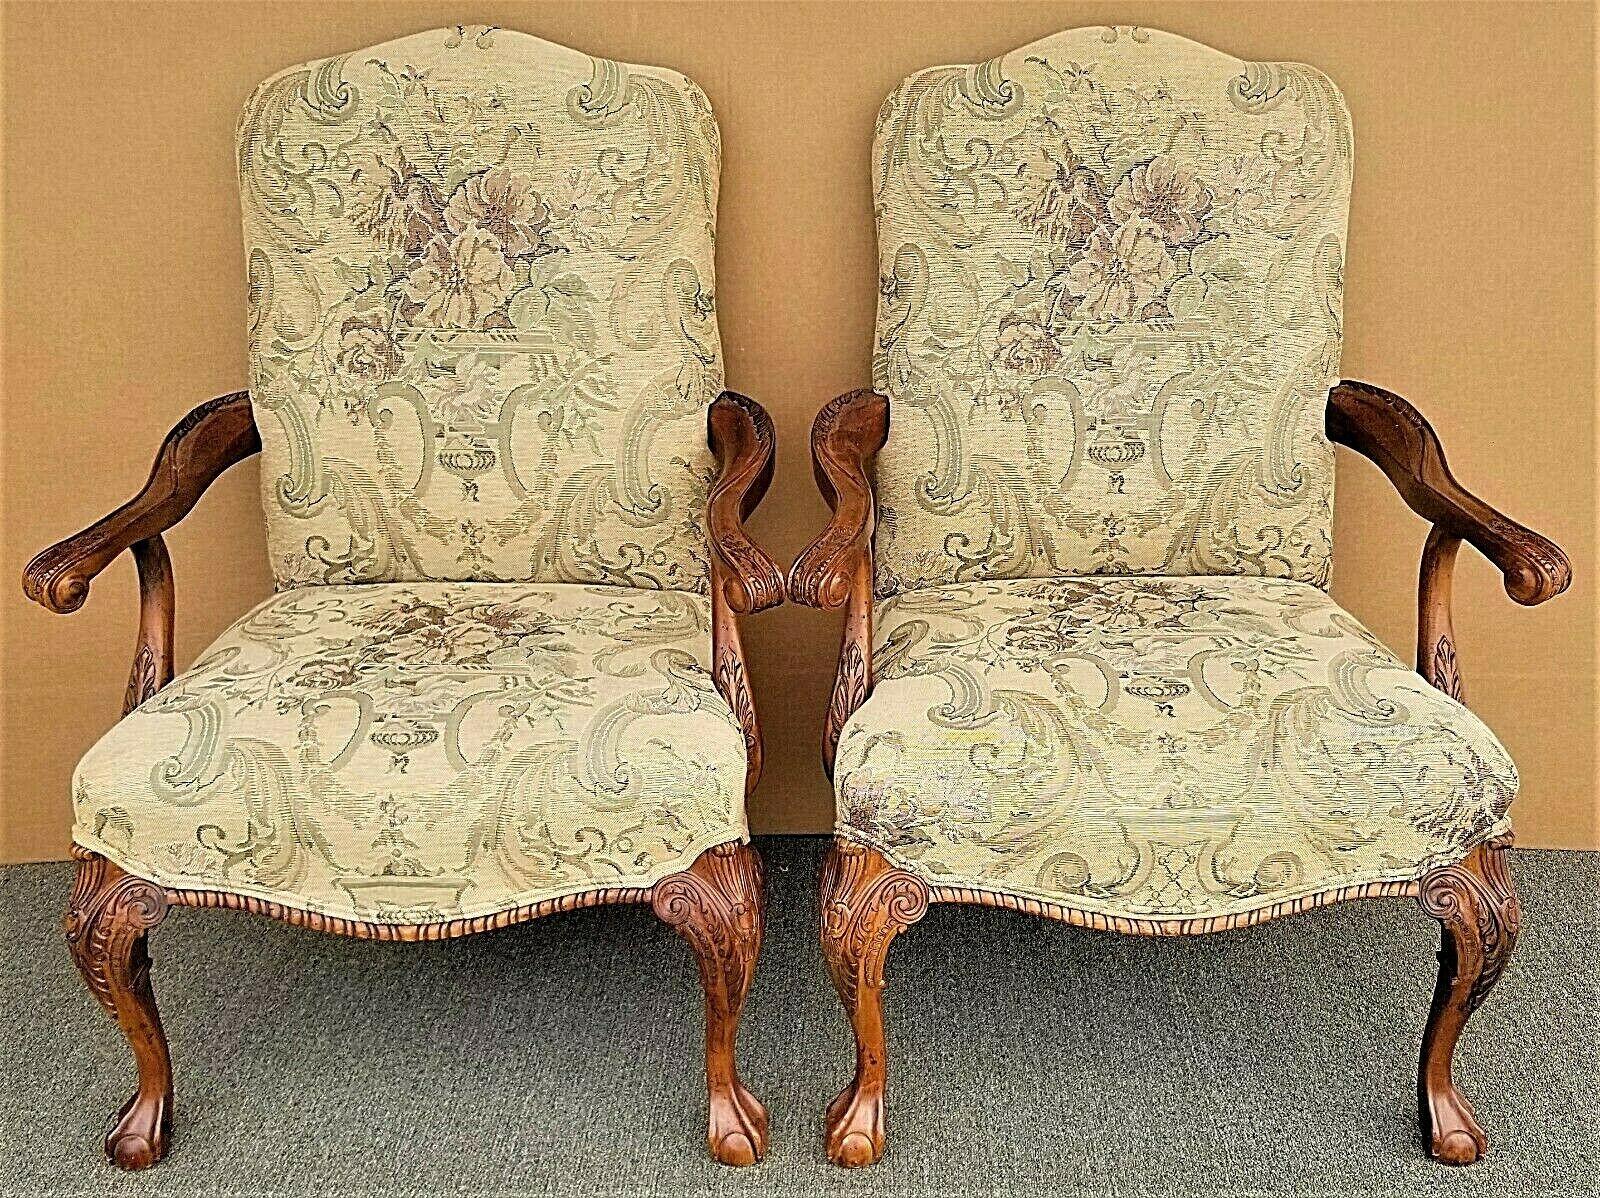 For FULL item description be sure to click on CONTINUE READING at the bottom of this listing.

Offering One Of Our Recent Palm Beach Estate Fine Furniture Acquisitions Of A Pair of Chippendale Style Ball & Claw Armchairs by Century Furniture